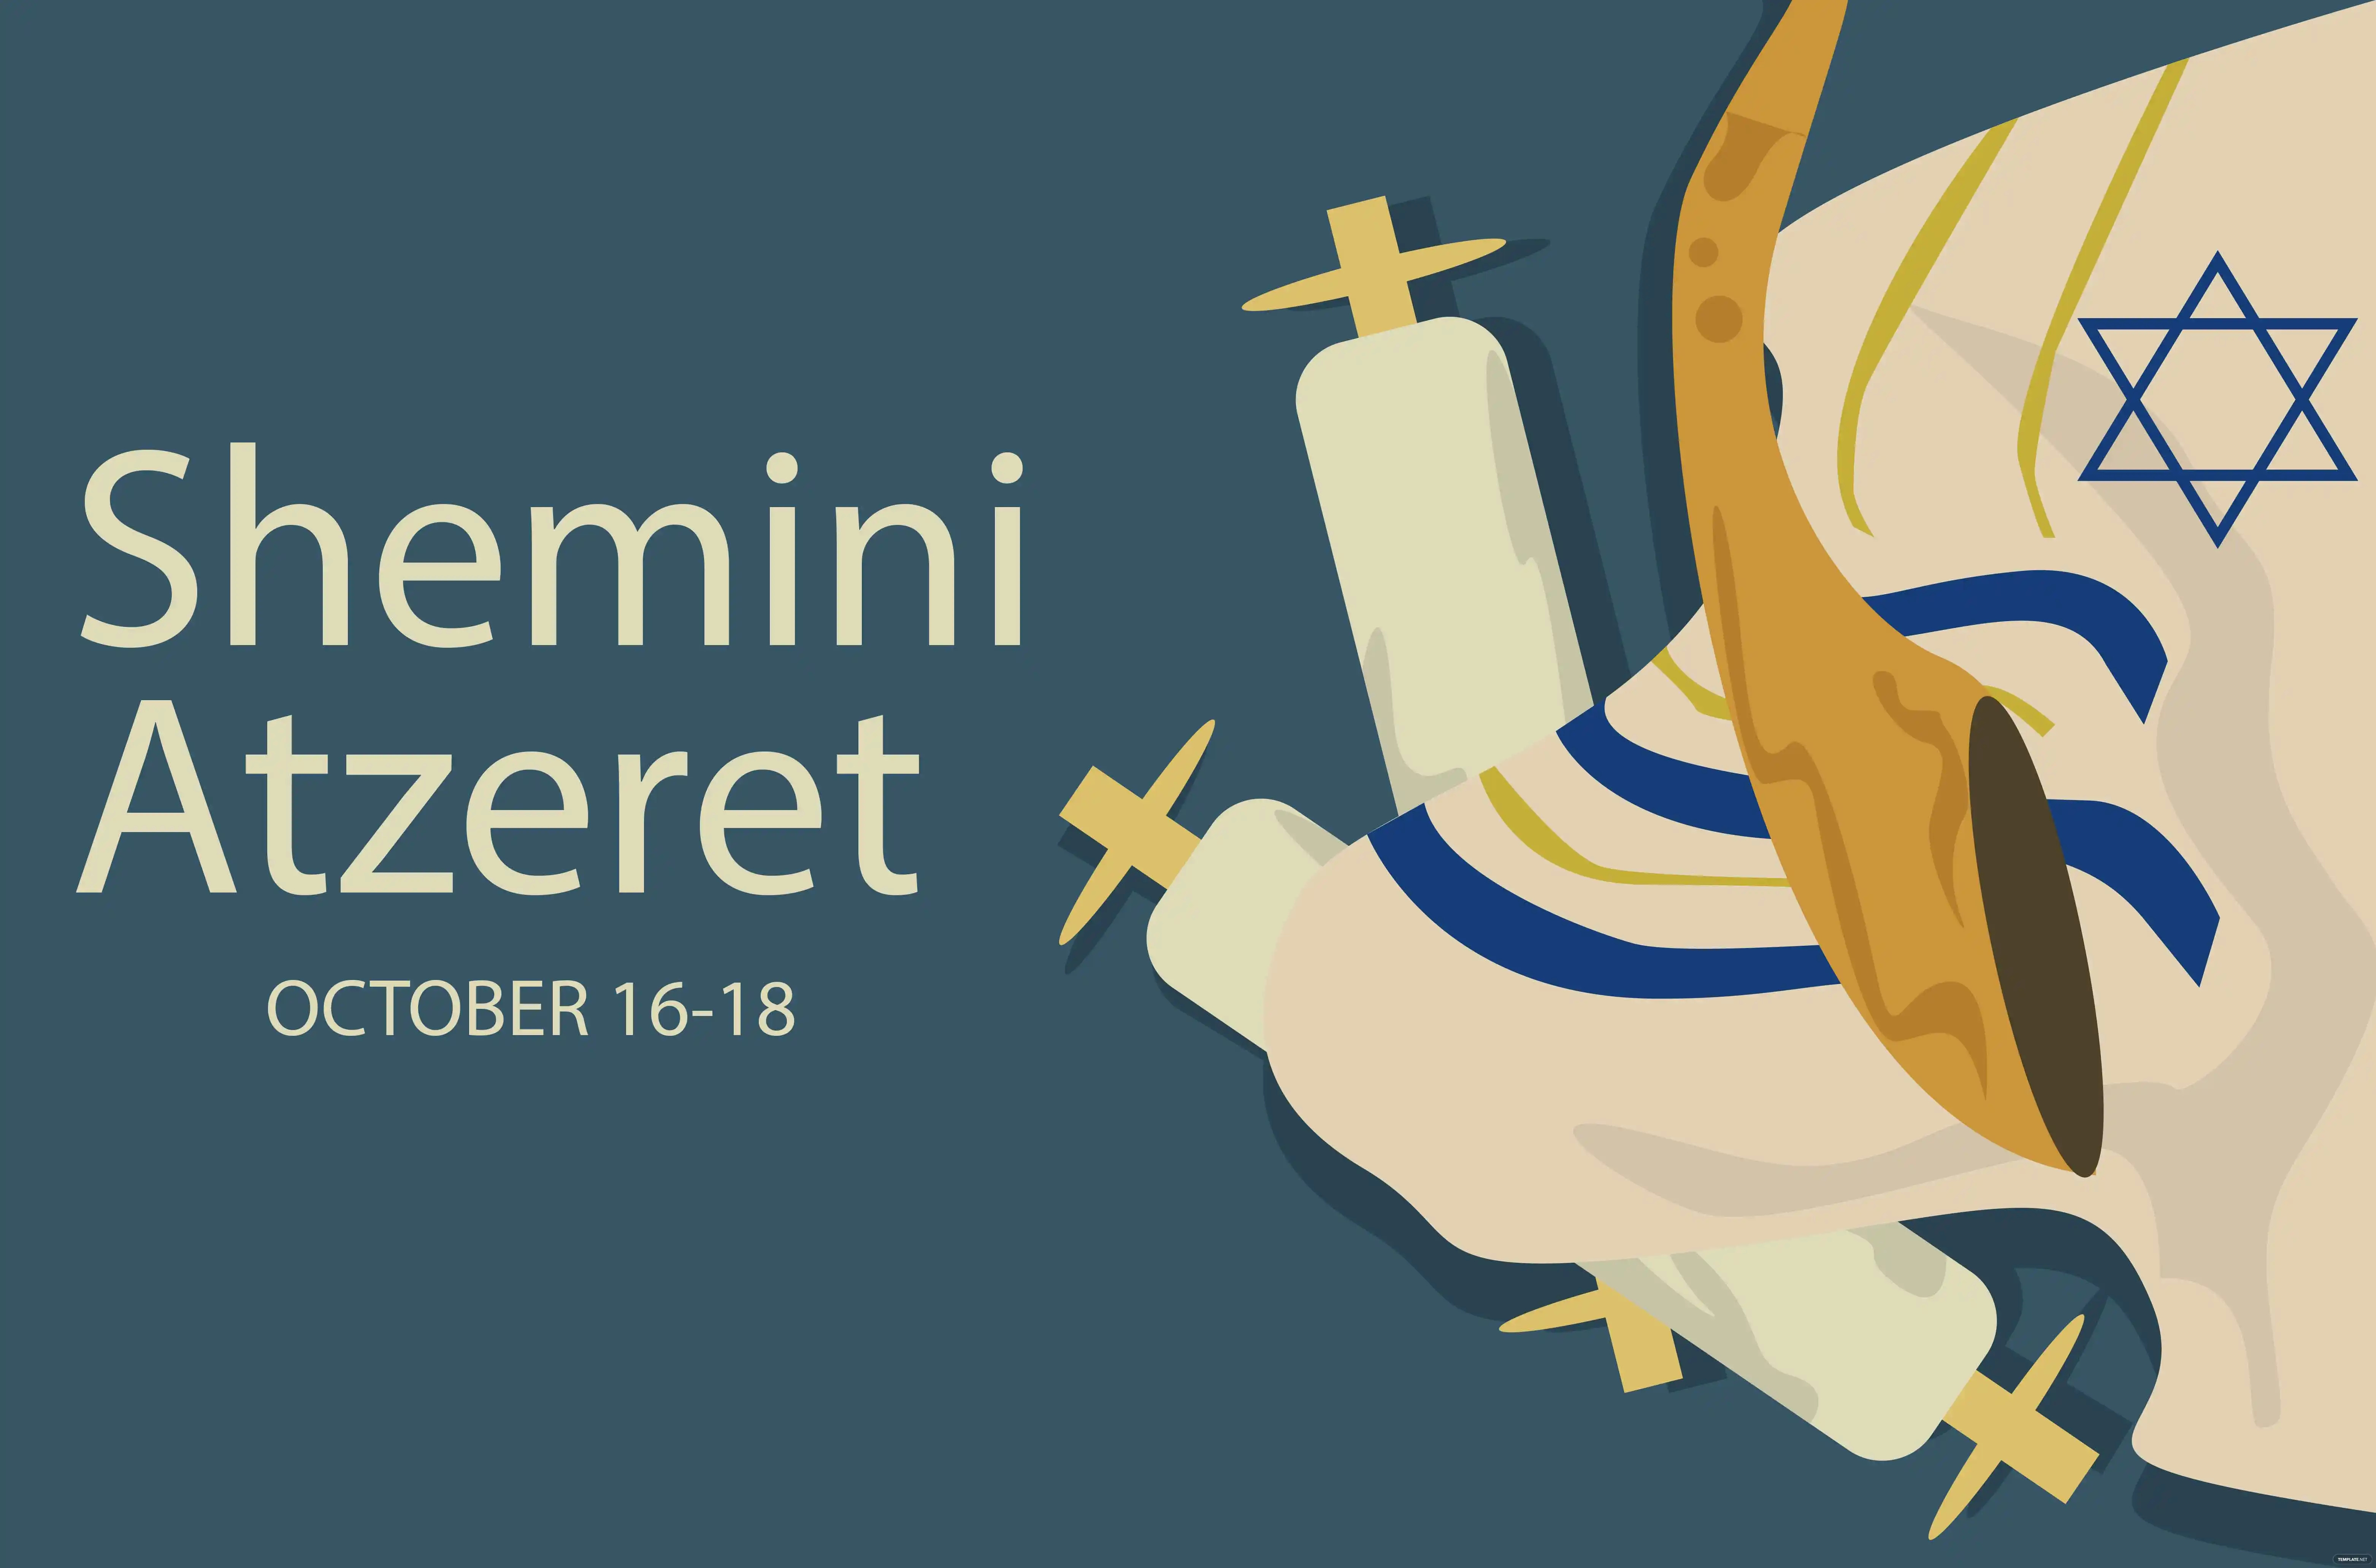 shemini atzeret banner ideas and examples